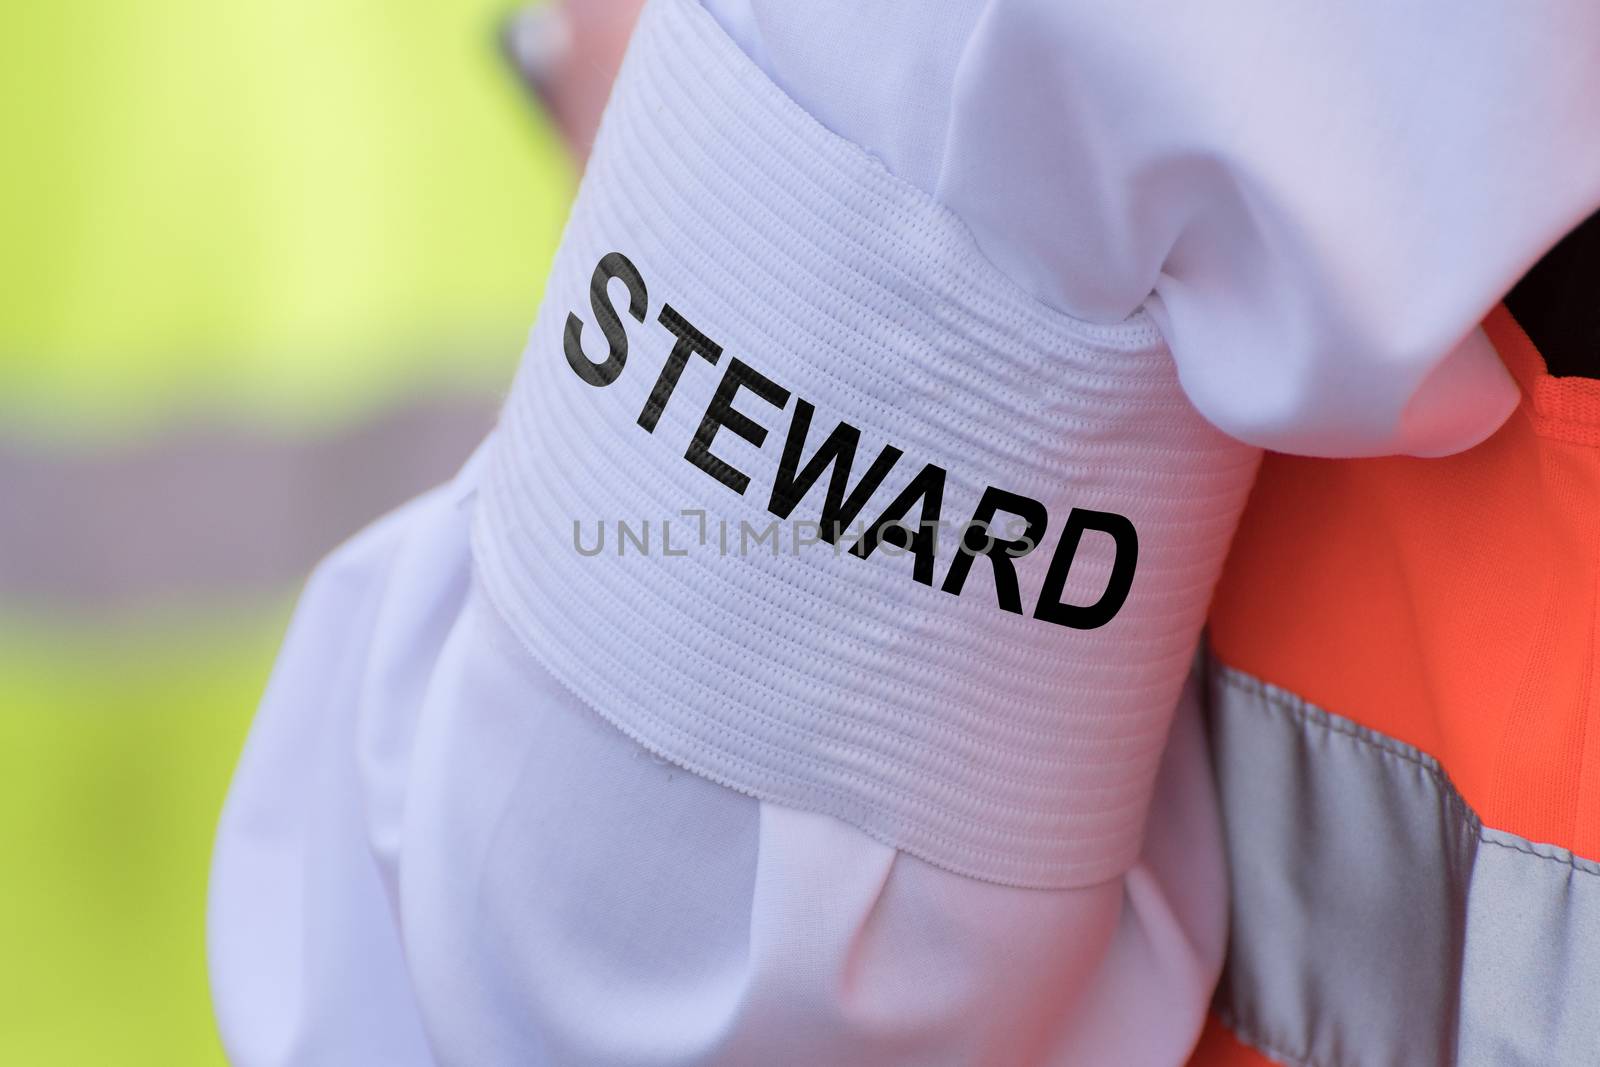 Detail of an armband on the upper arm with the text "STEWARD"